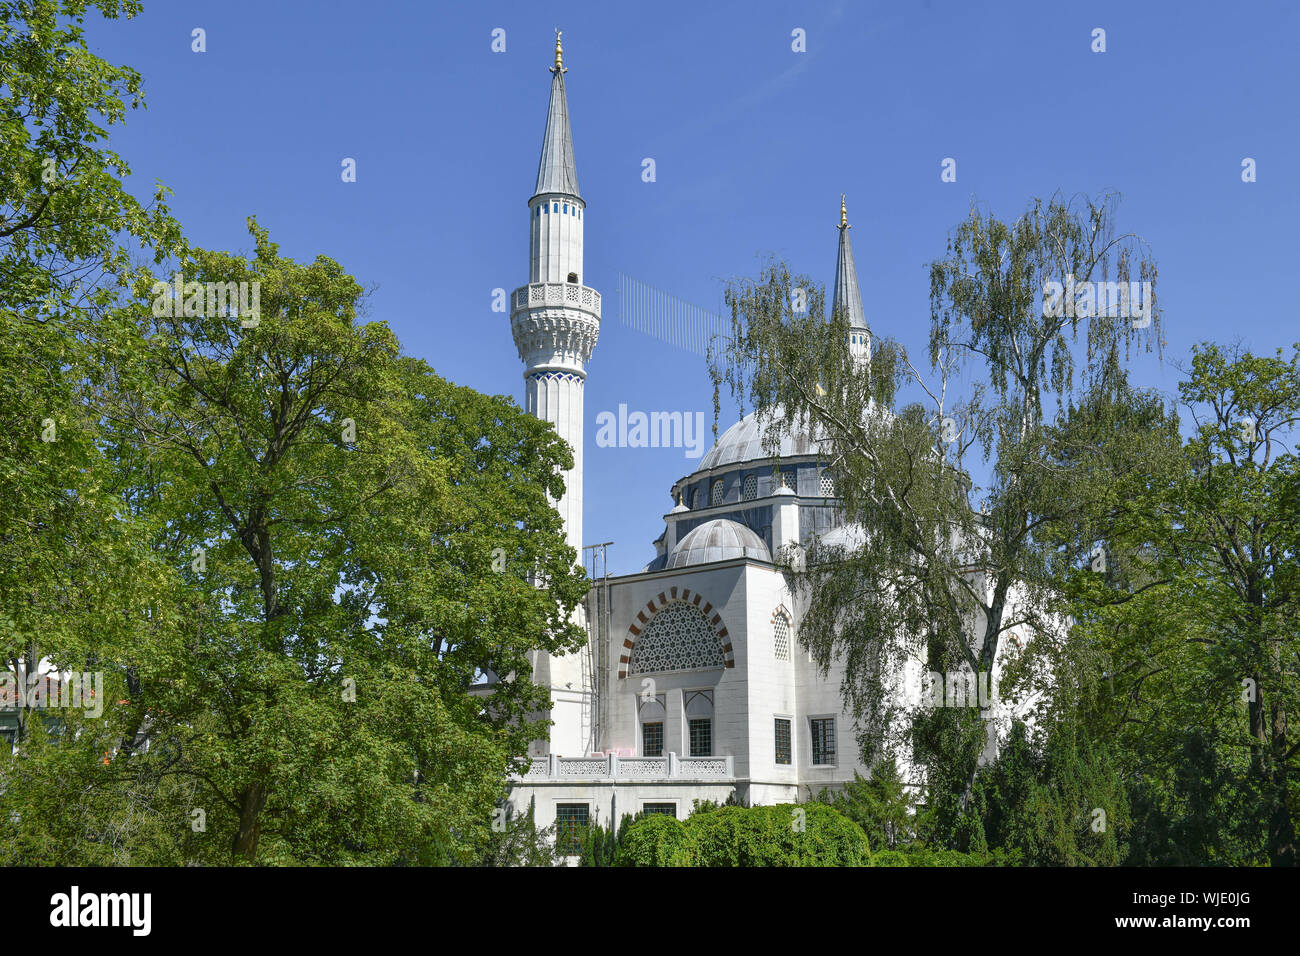 View, architecture, Outside, Outside, outside view, outside view, Berlin, Columbia dam, Germany, building, building, church, Islam, Islamic, Islamic, Stock Photo